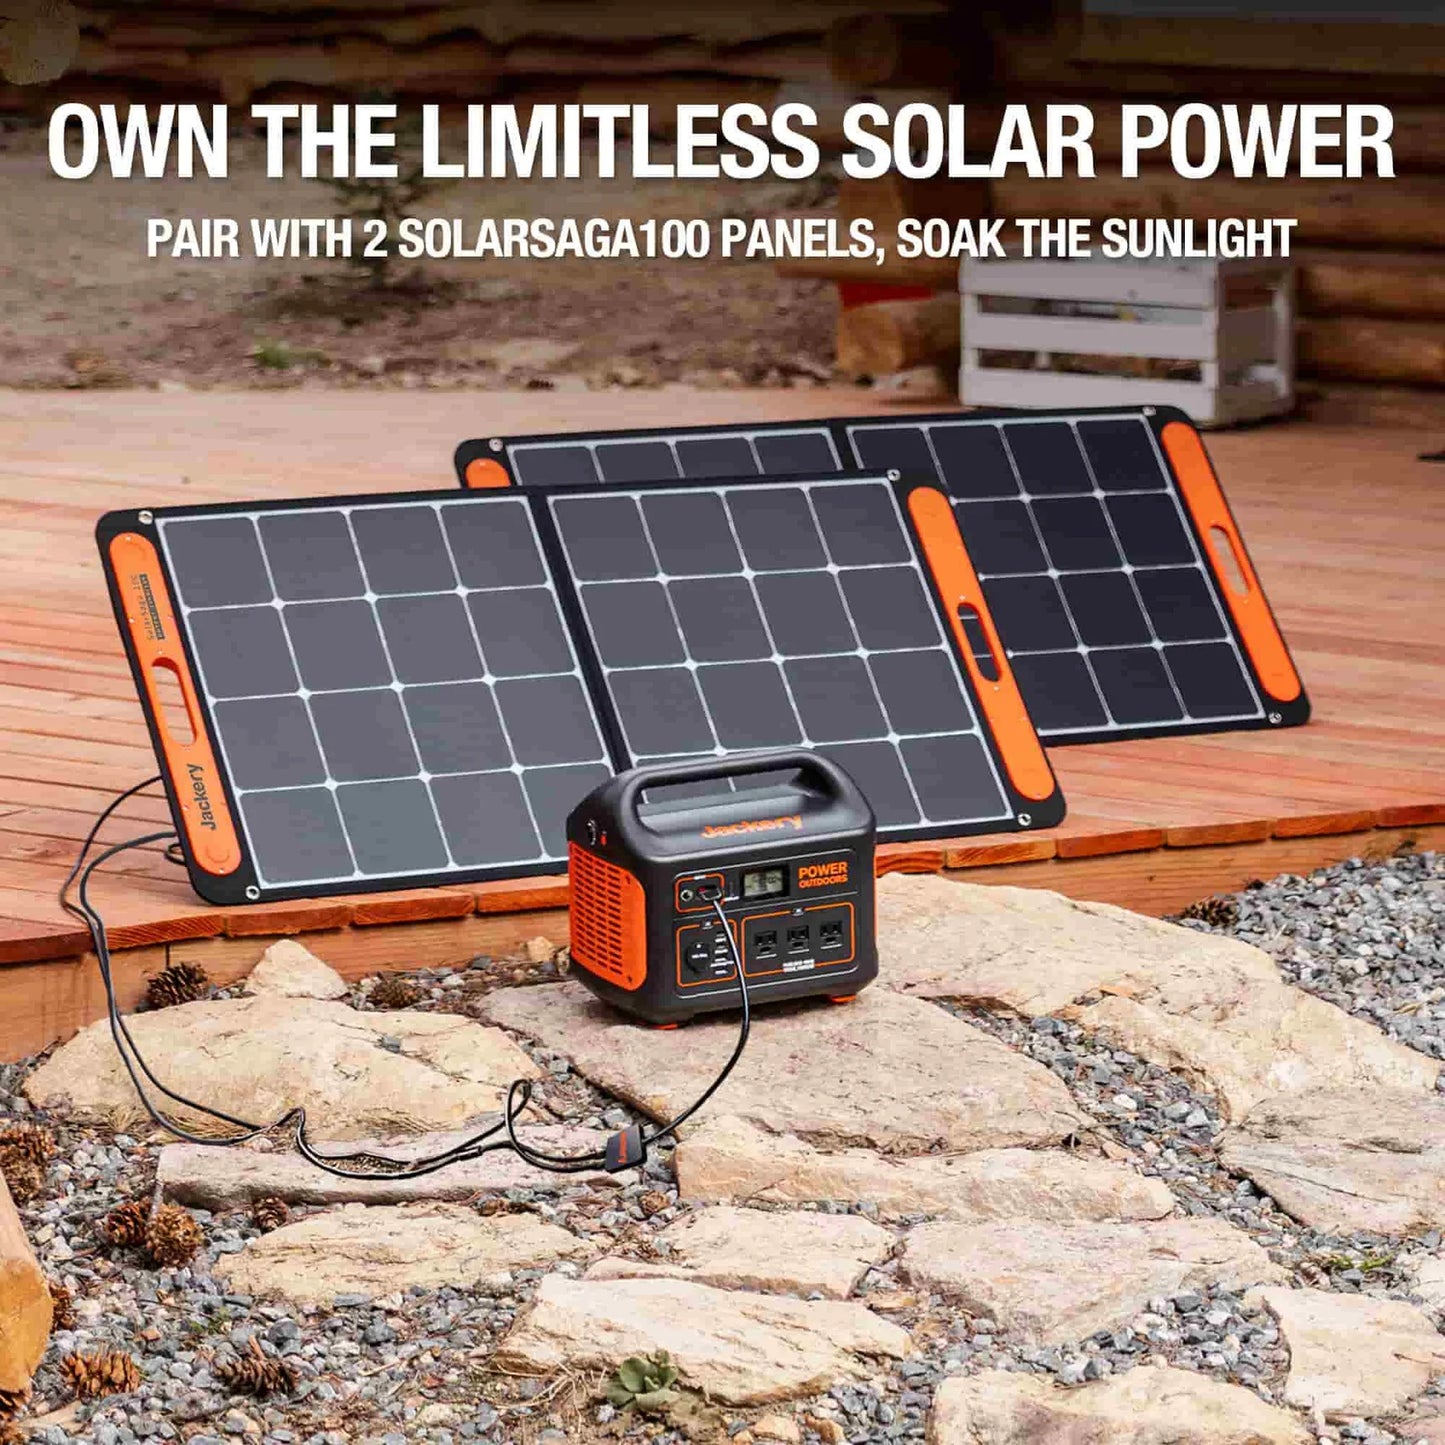 Pair 2 SolarSaga 100W Panels With the Jackery Explorer 1000 For Limitless Solar Power